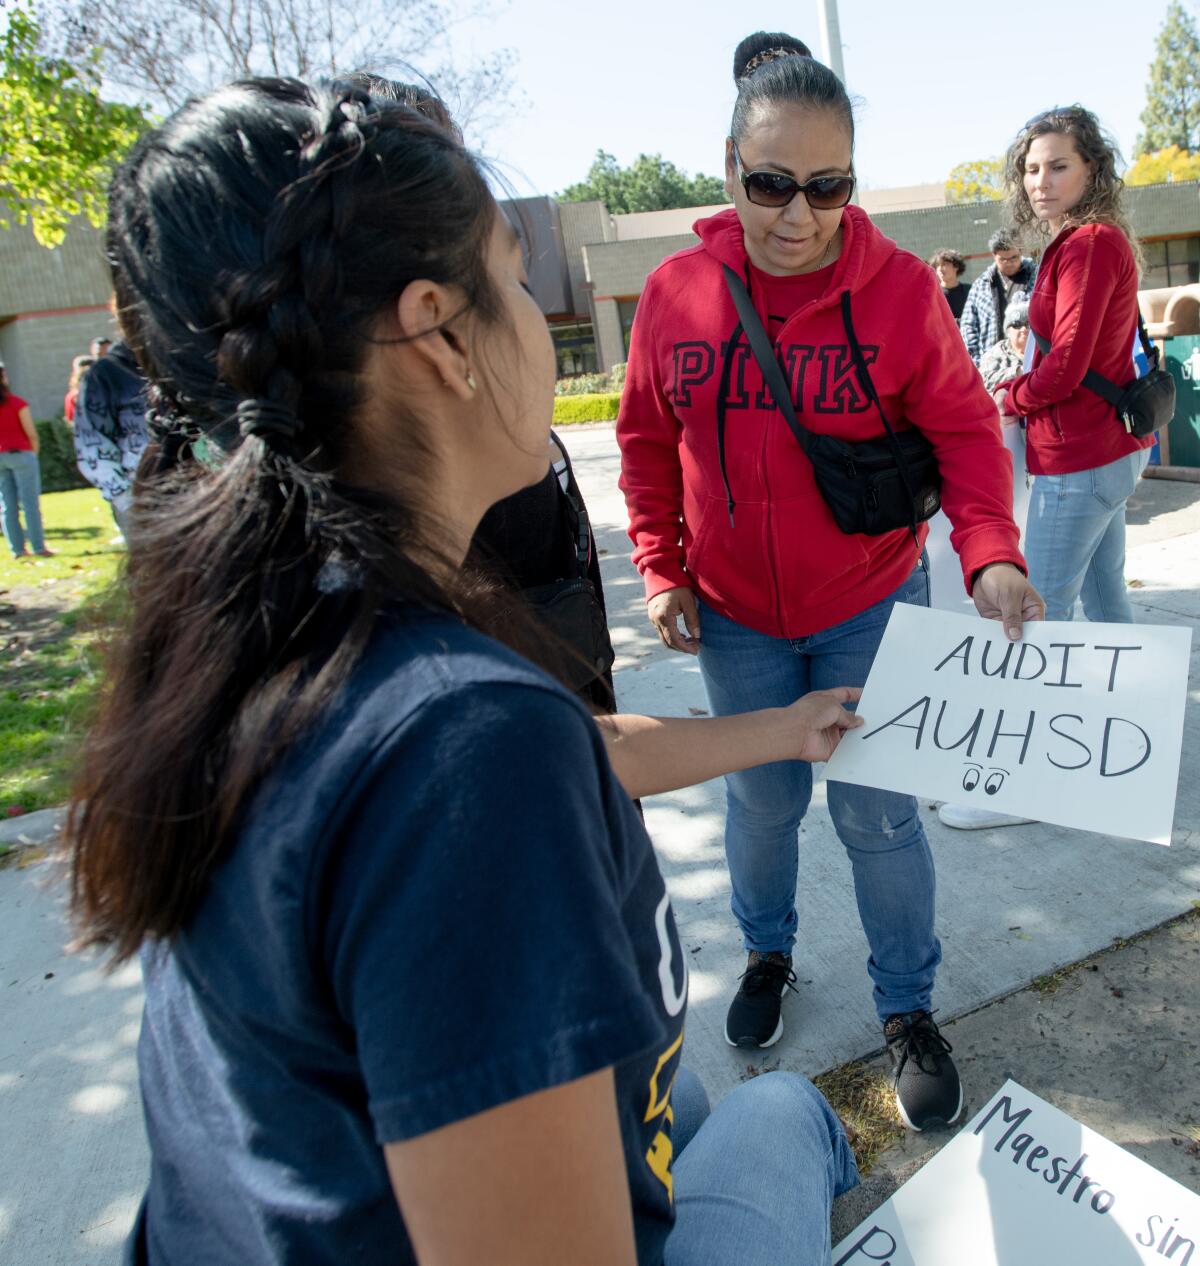 Gisele Aguilar hands a flyer protesting layoffs to Sofia Romero, a parent of students in the Anaheim district.